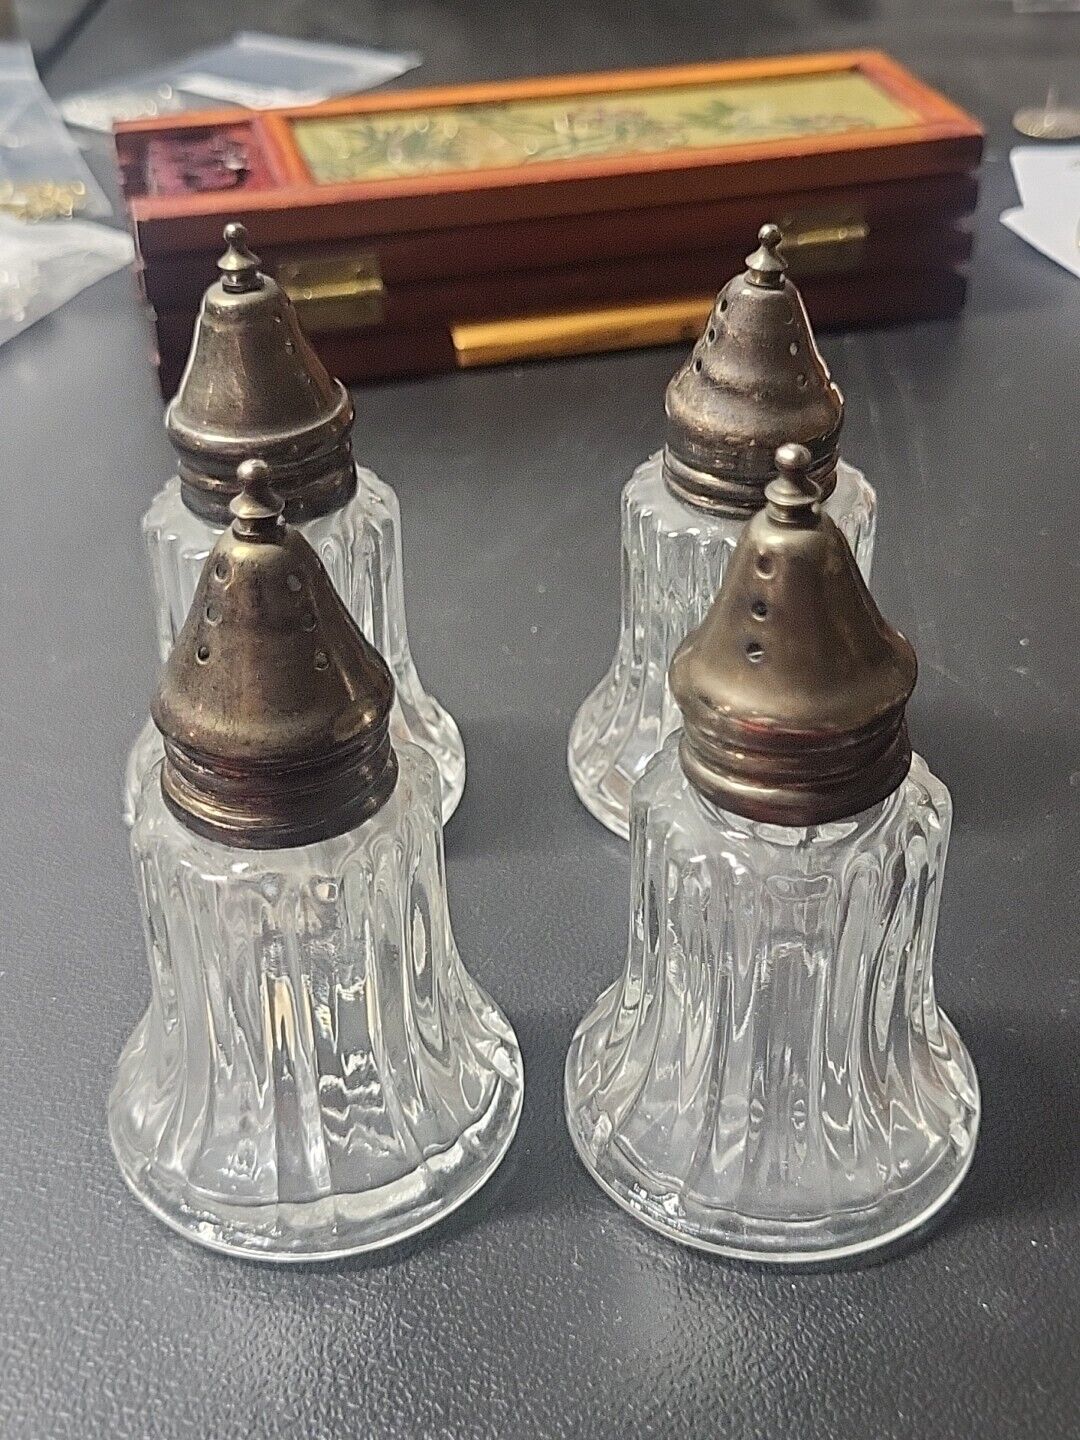 Vintage  Pressed Glass Salt And Pepper  Shakers  Aet Of 4